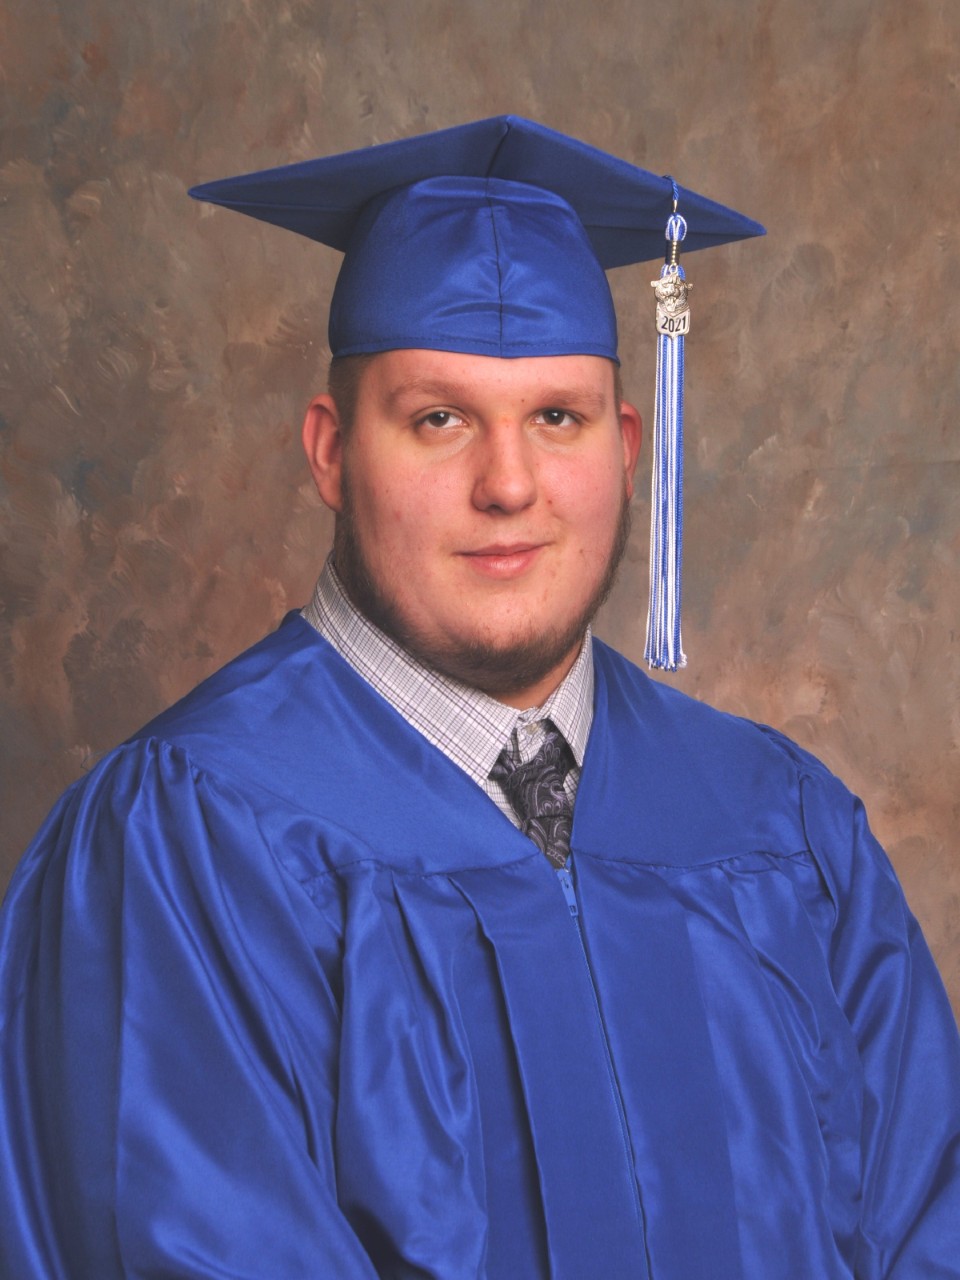 Austin Wade in his cap and gown.